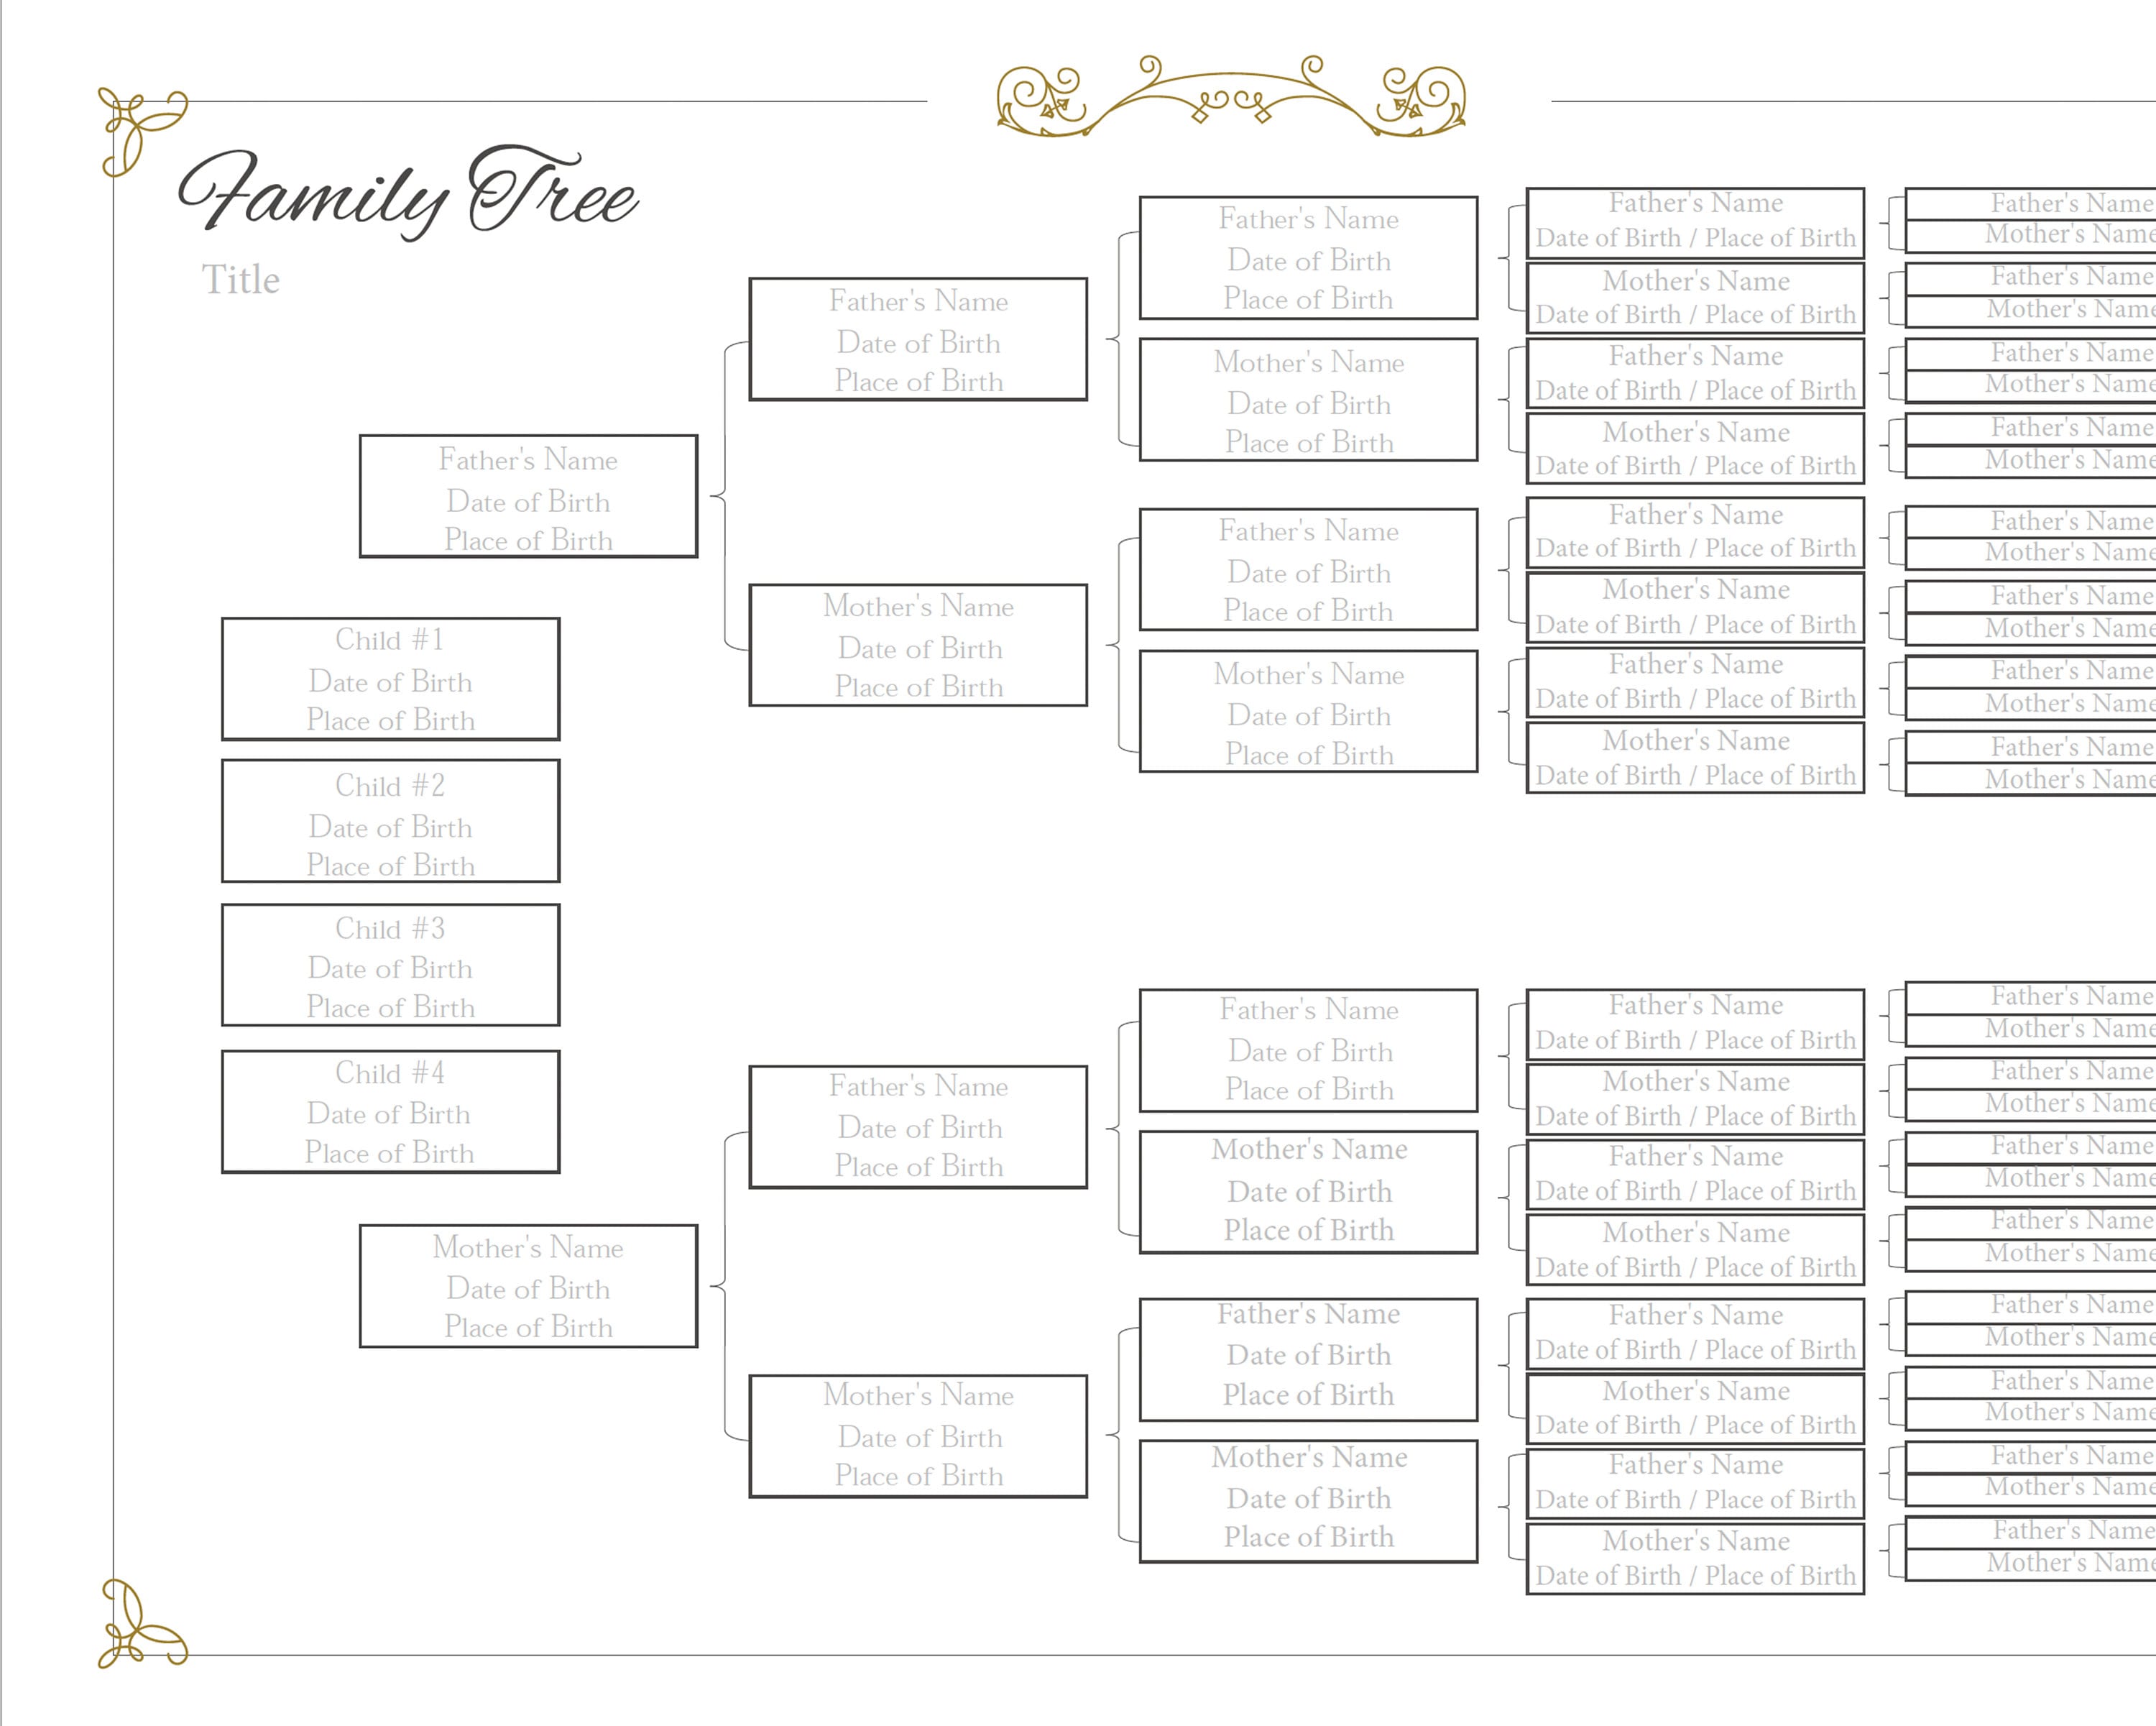 Family Tree Template Several Children Fillable Template 6 Generation ...